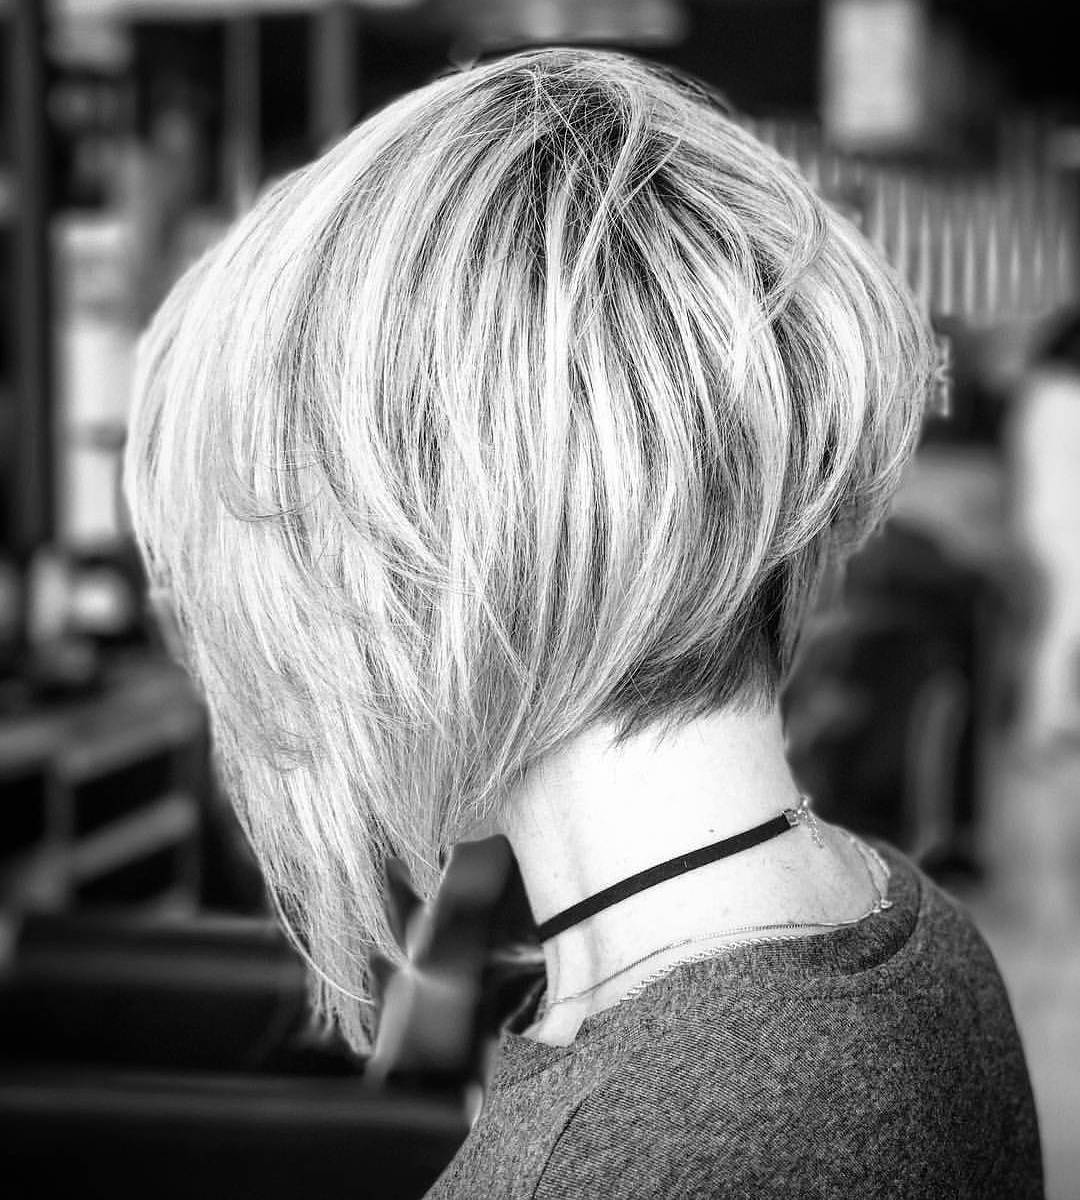 Women Short Haircut for Thick Hair, Short Hairstyle Trends